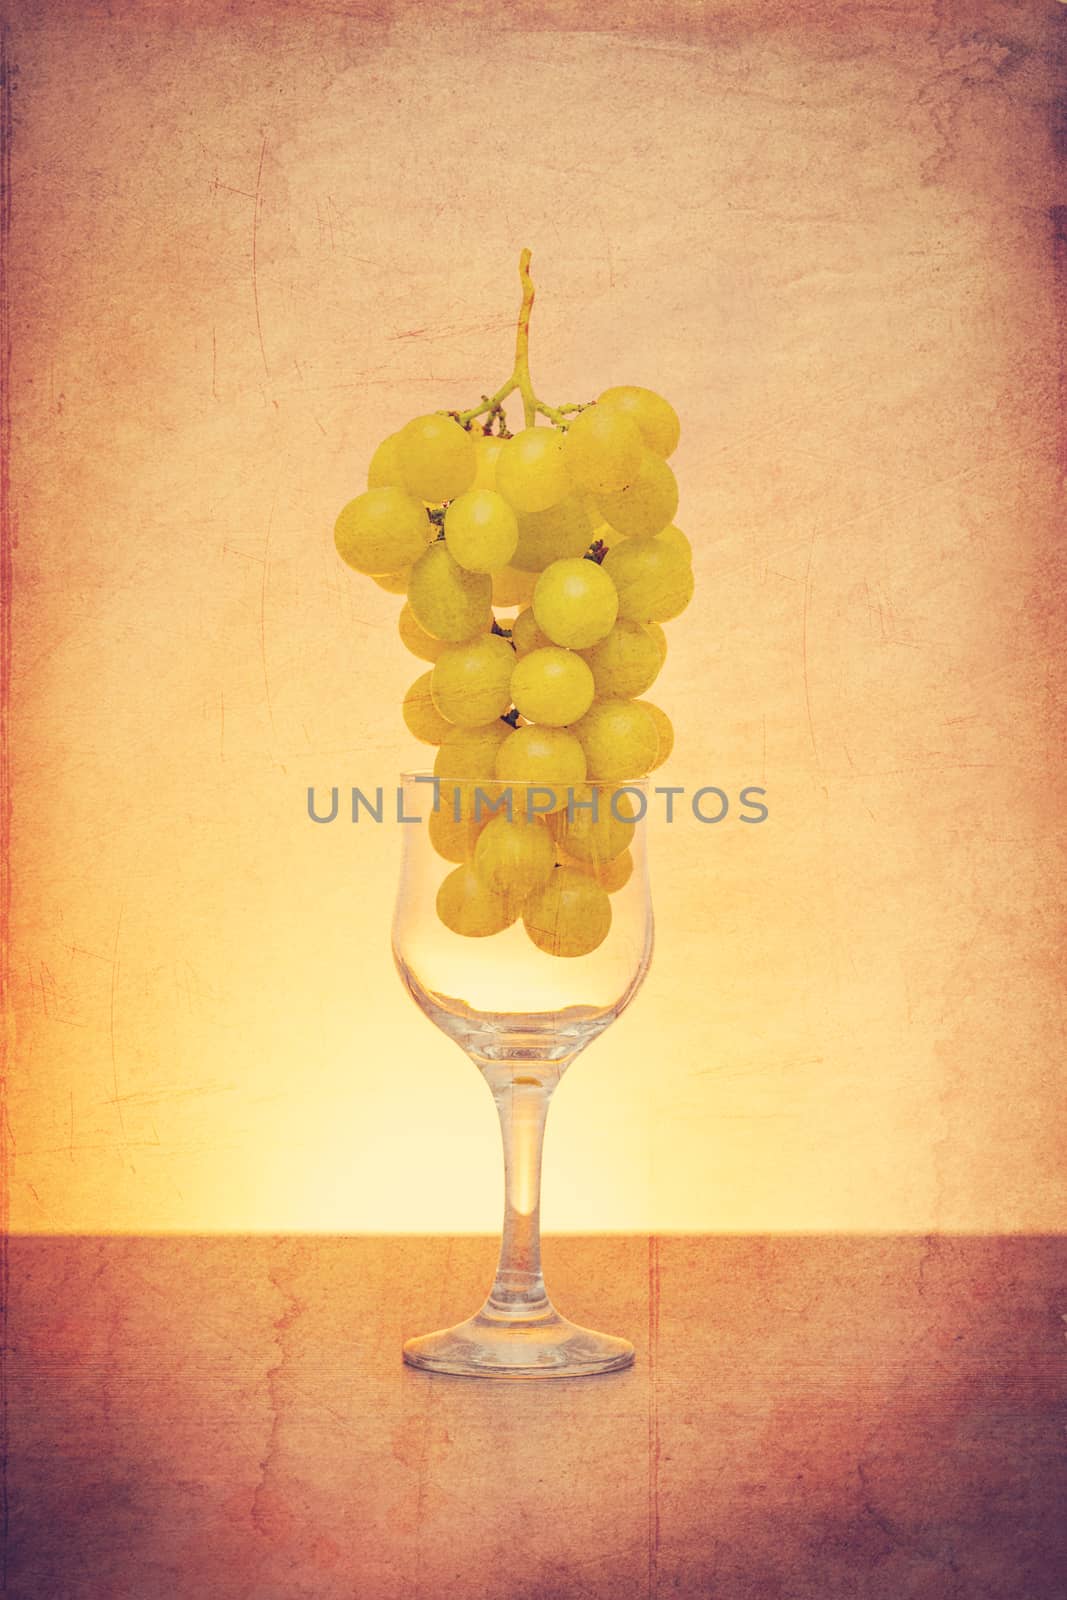 Grapes in wine glass concept by marugod83